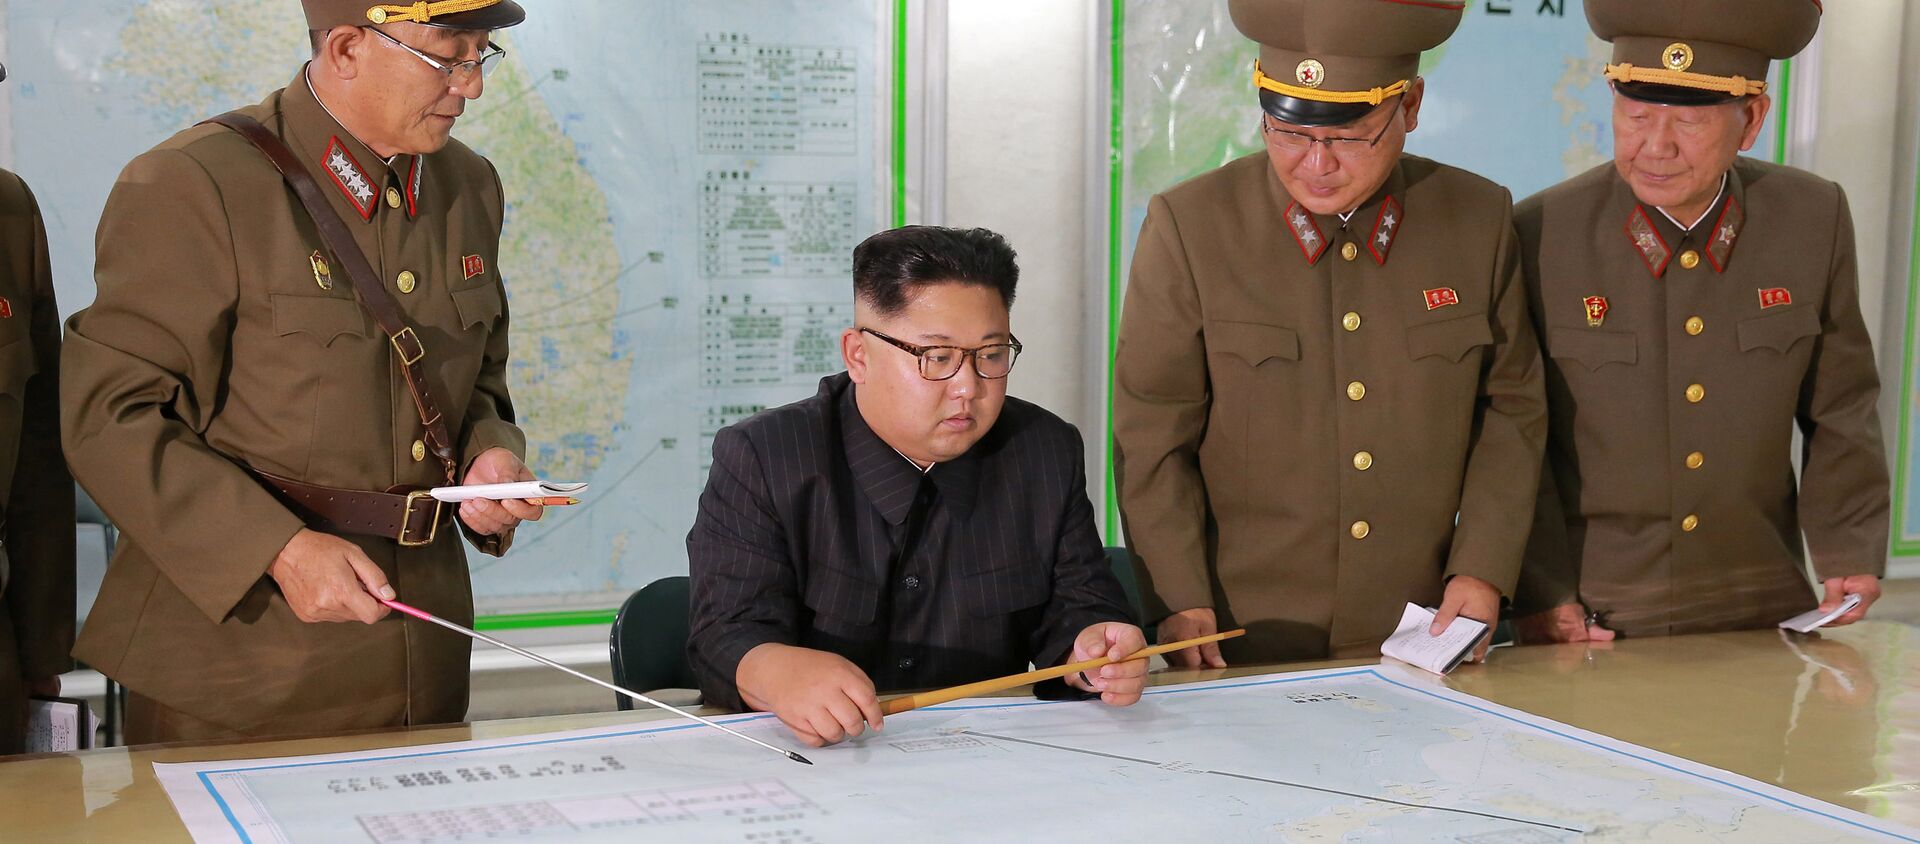 North Korean leader Kim Jong Un visits the Command of the Strategic Force of the Korean People's Army (KPA) in an unknown location in North Korea in this undated photo released by North Korea's Korean Central News Agency (KCNA) on August 15, 2017 - Sputnik International, 1920, 01.07.2020